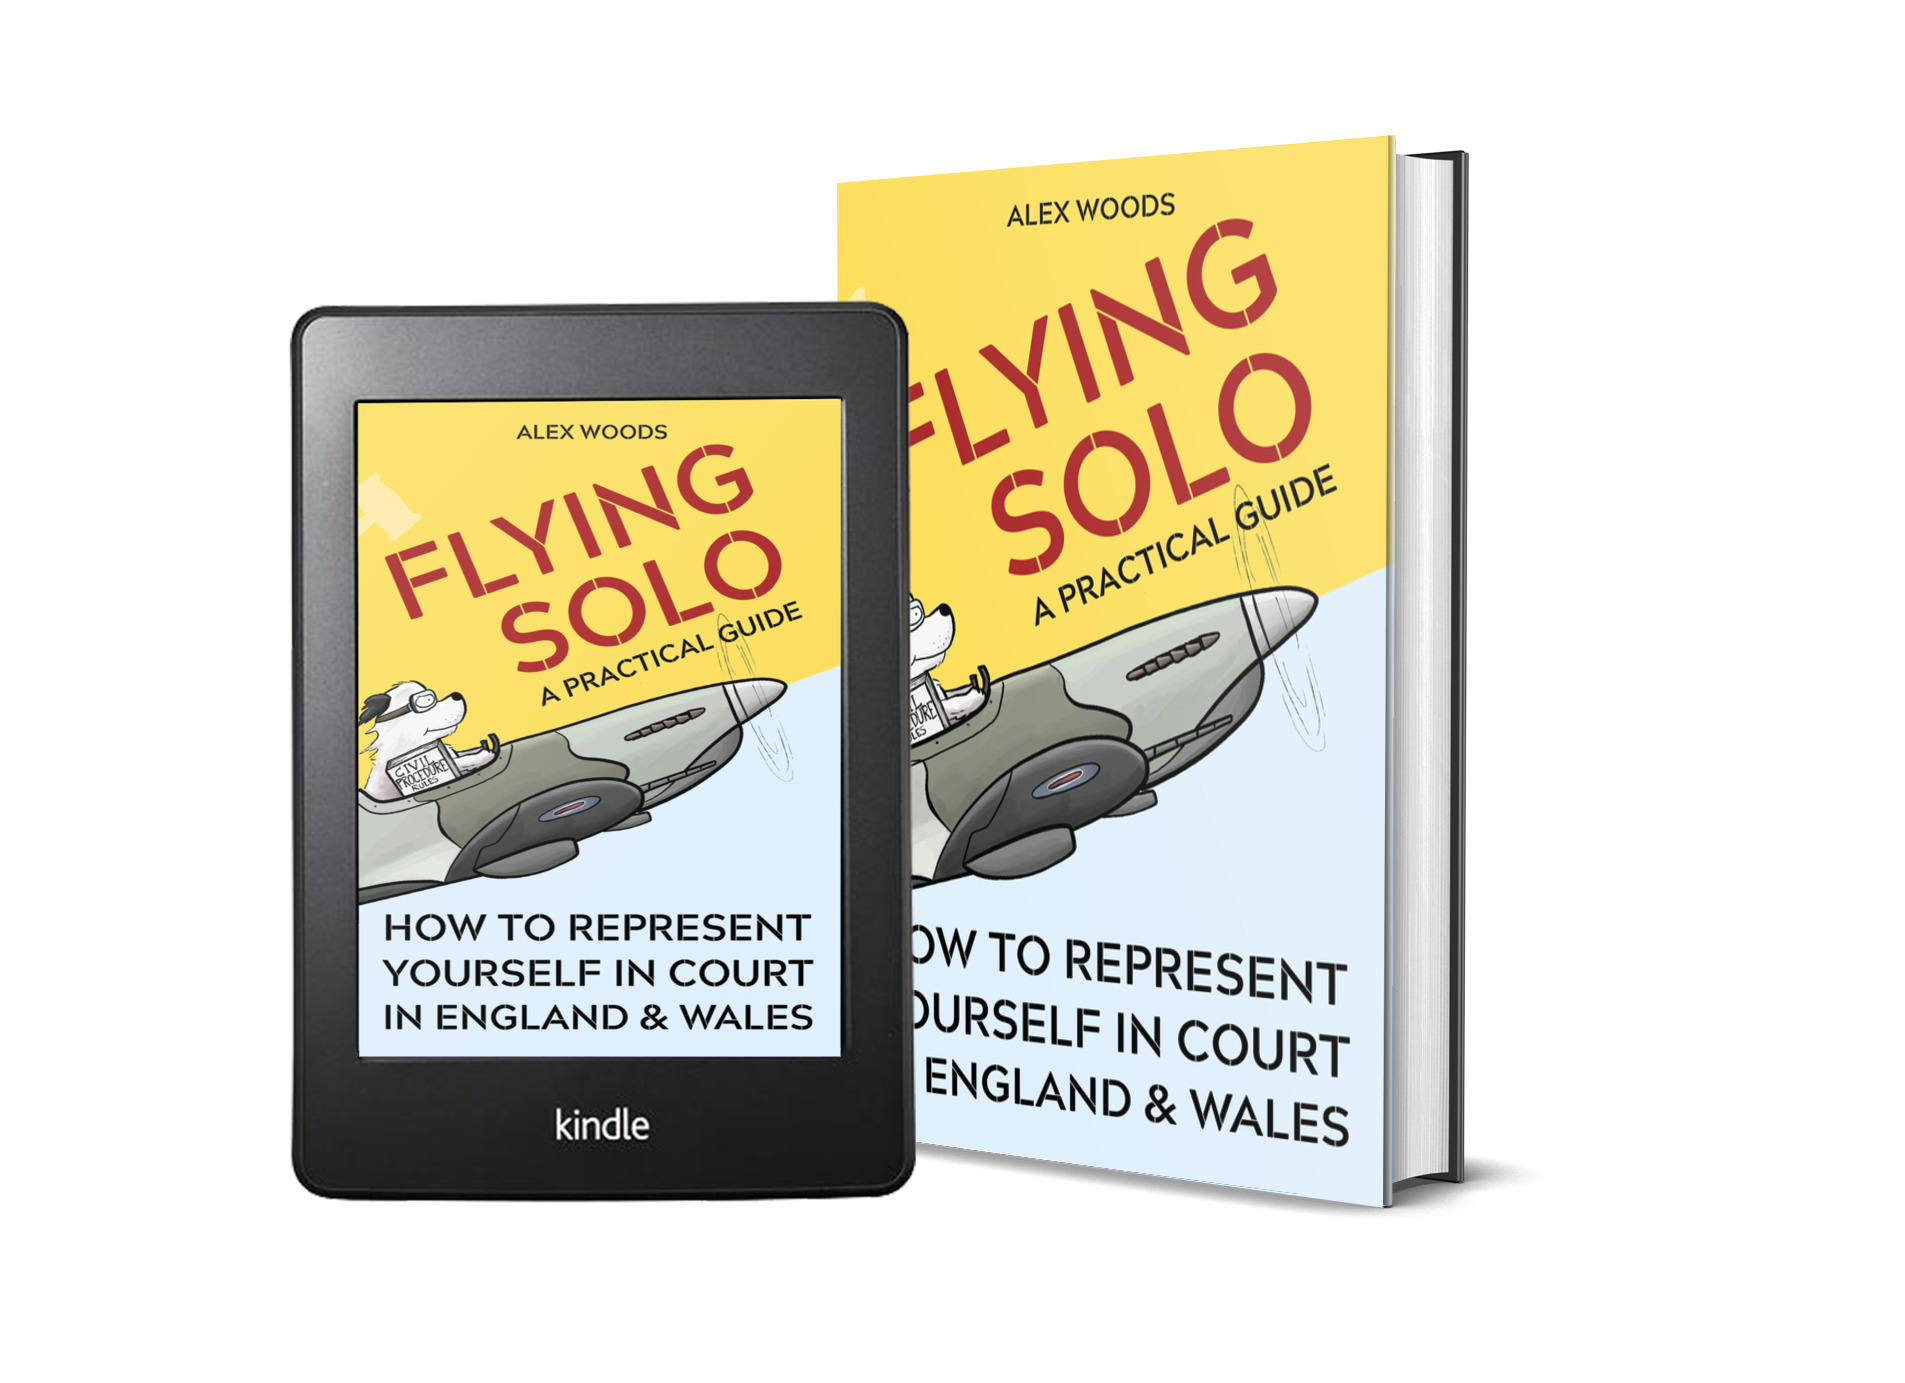 Flying Solo book cover